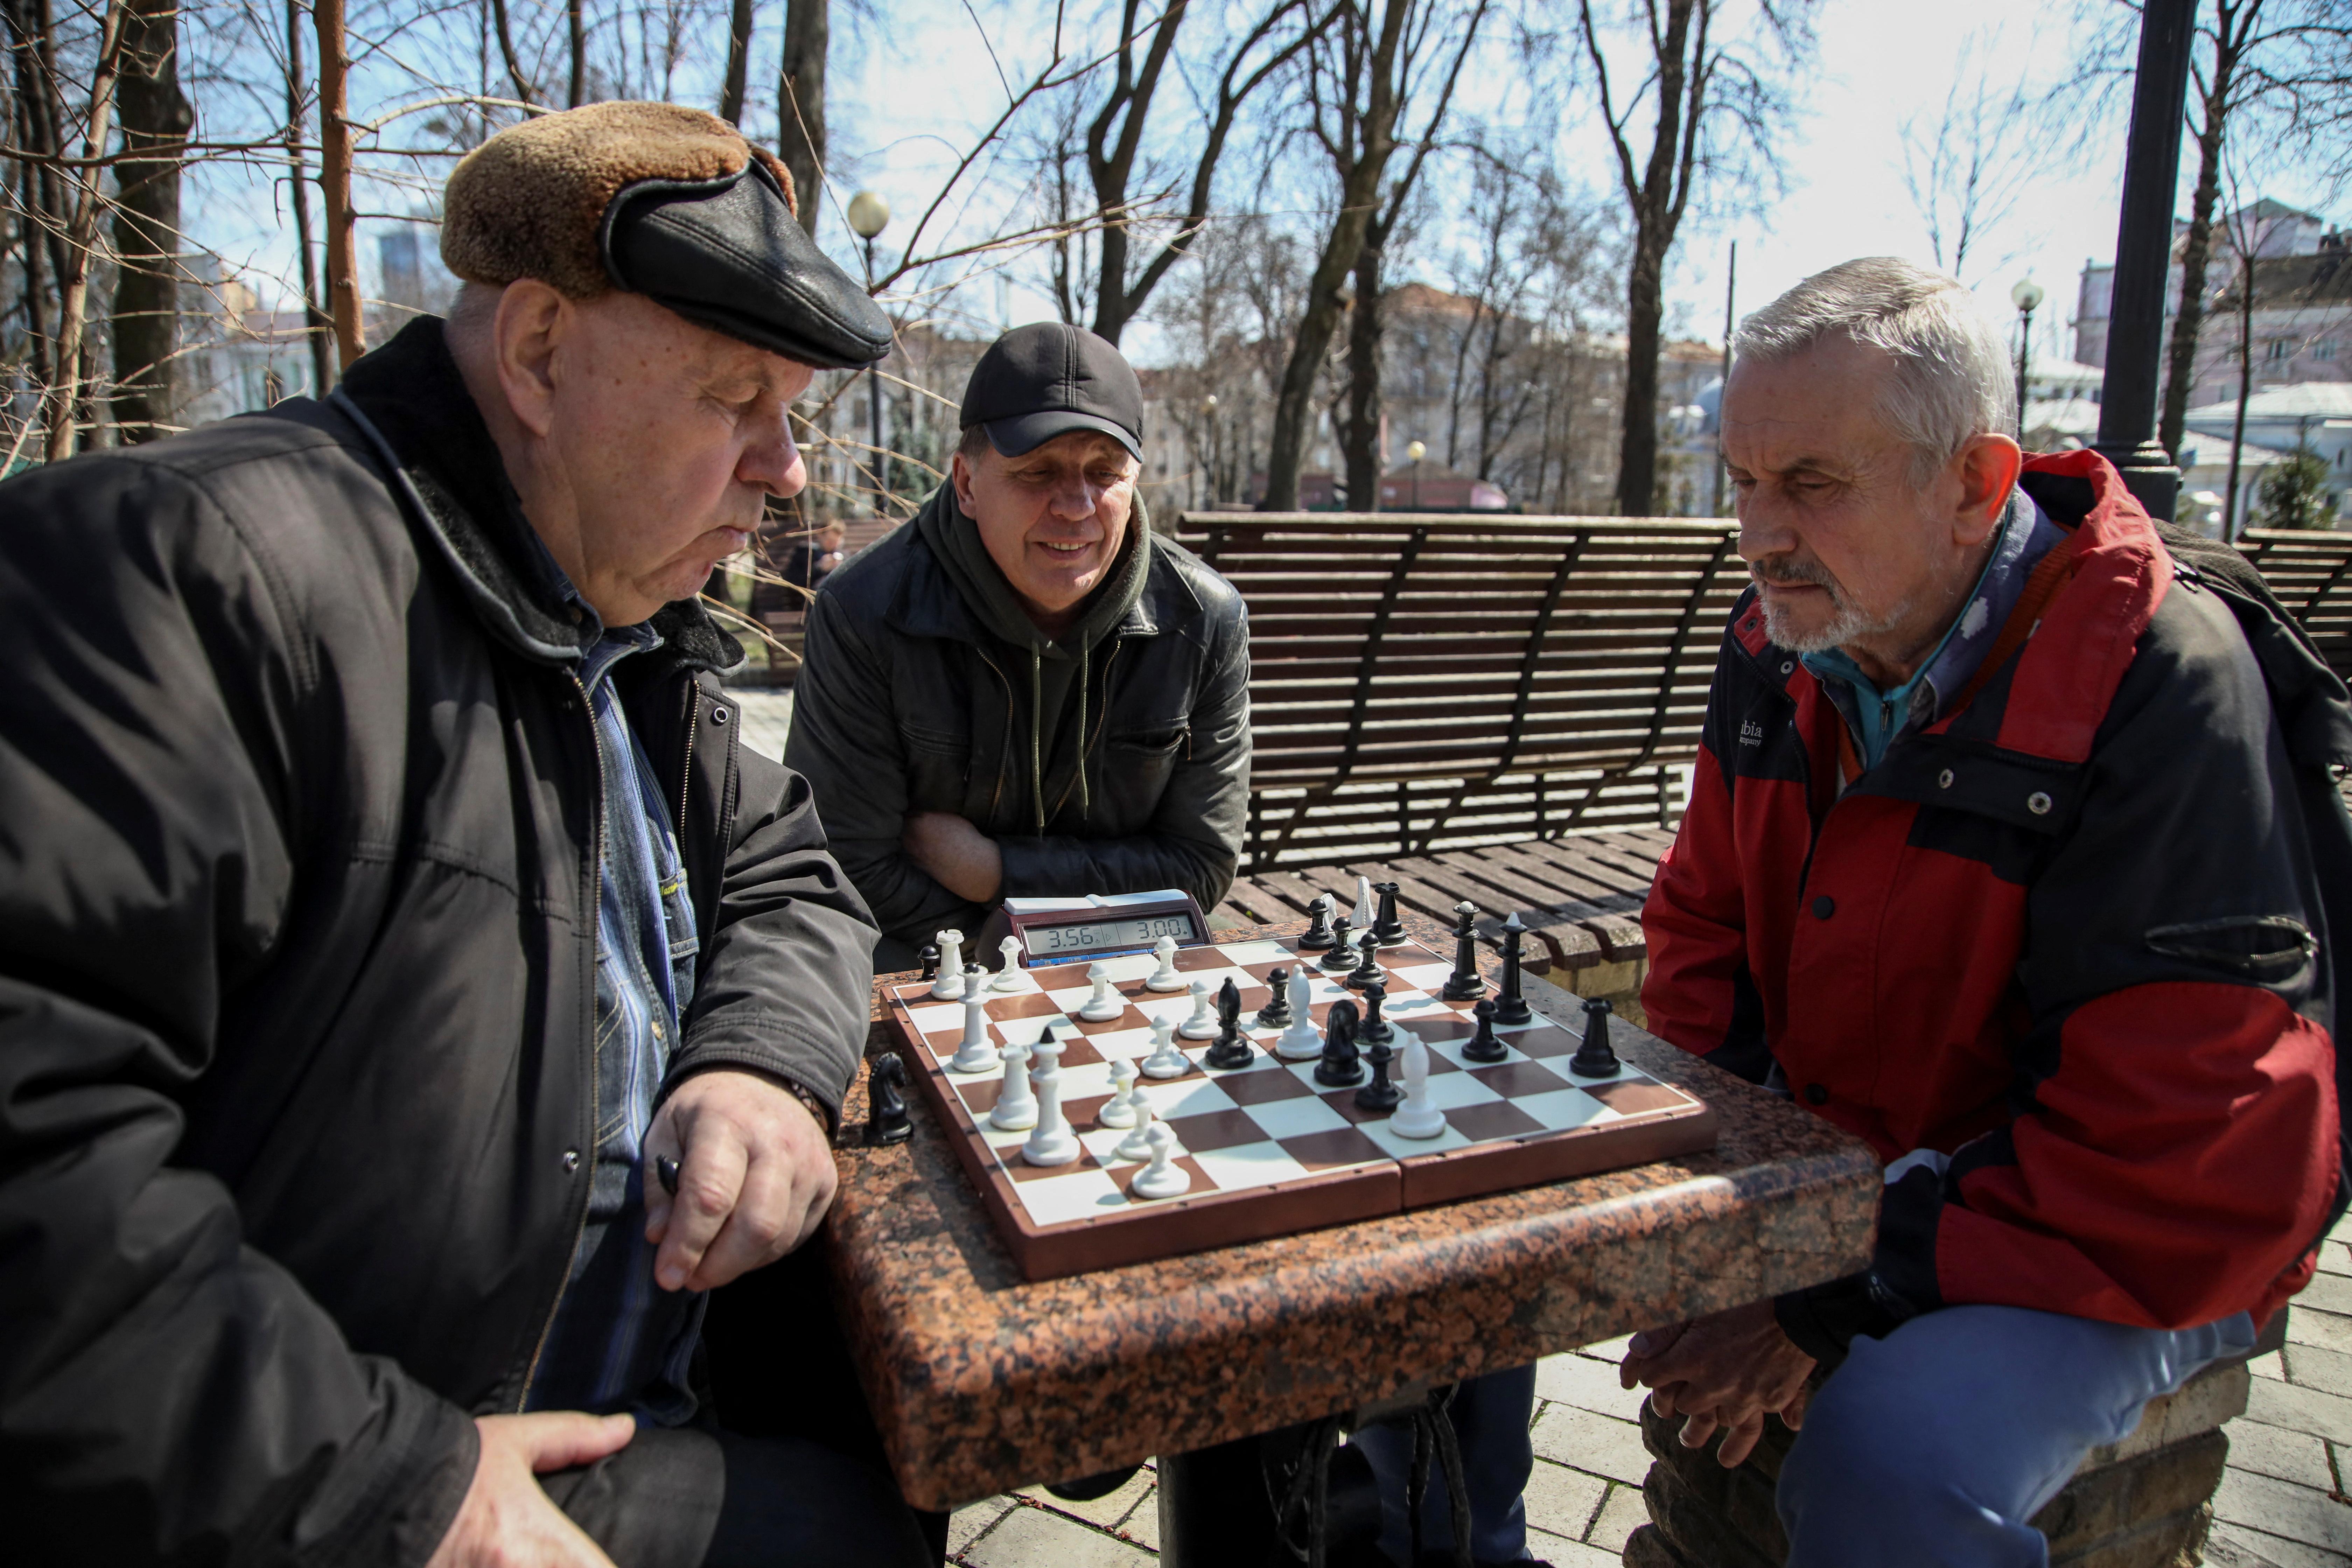 Russia's war on Ukraine fractures tight-knit world of chess – DW –  03/17/2022